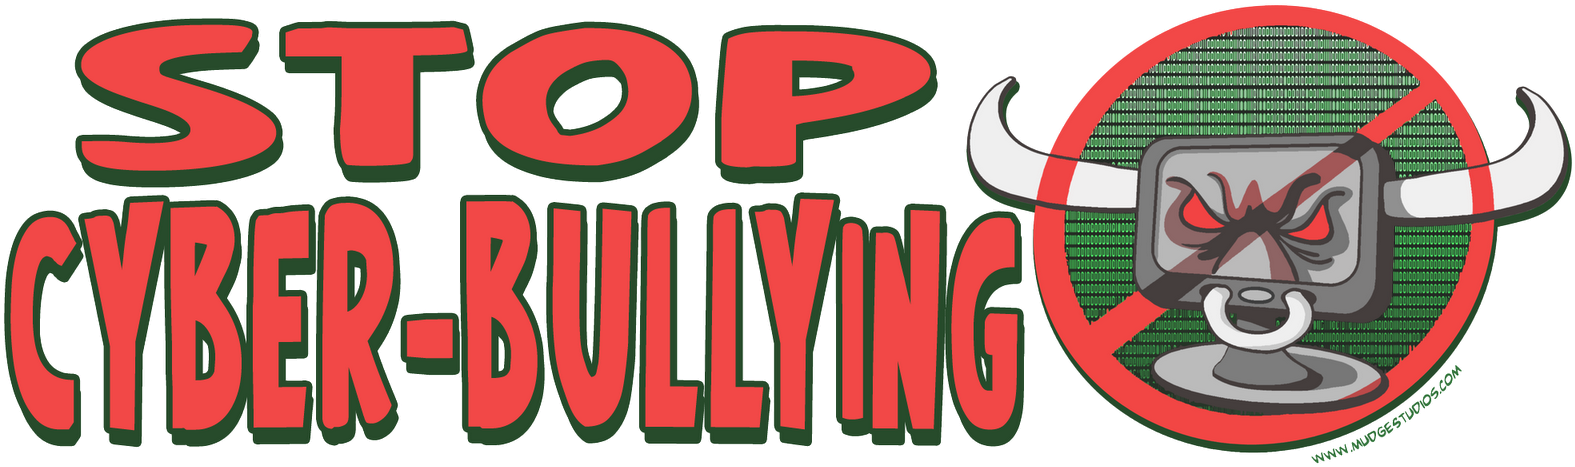 Image Detail For Stop Cyber Bullying Gear @ Cafepress - Stop Cyber Bullying Logo (1600x480)